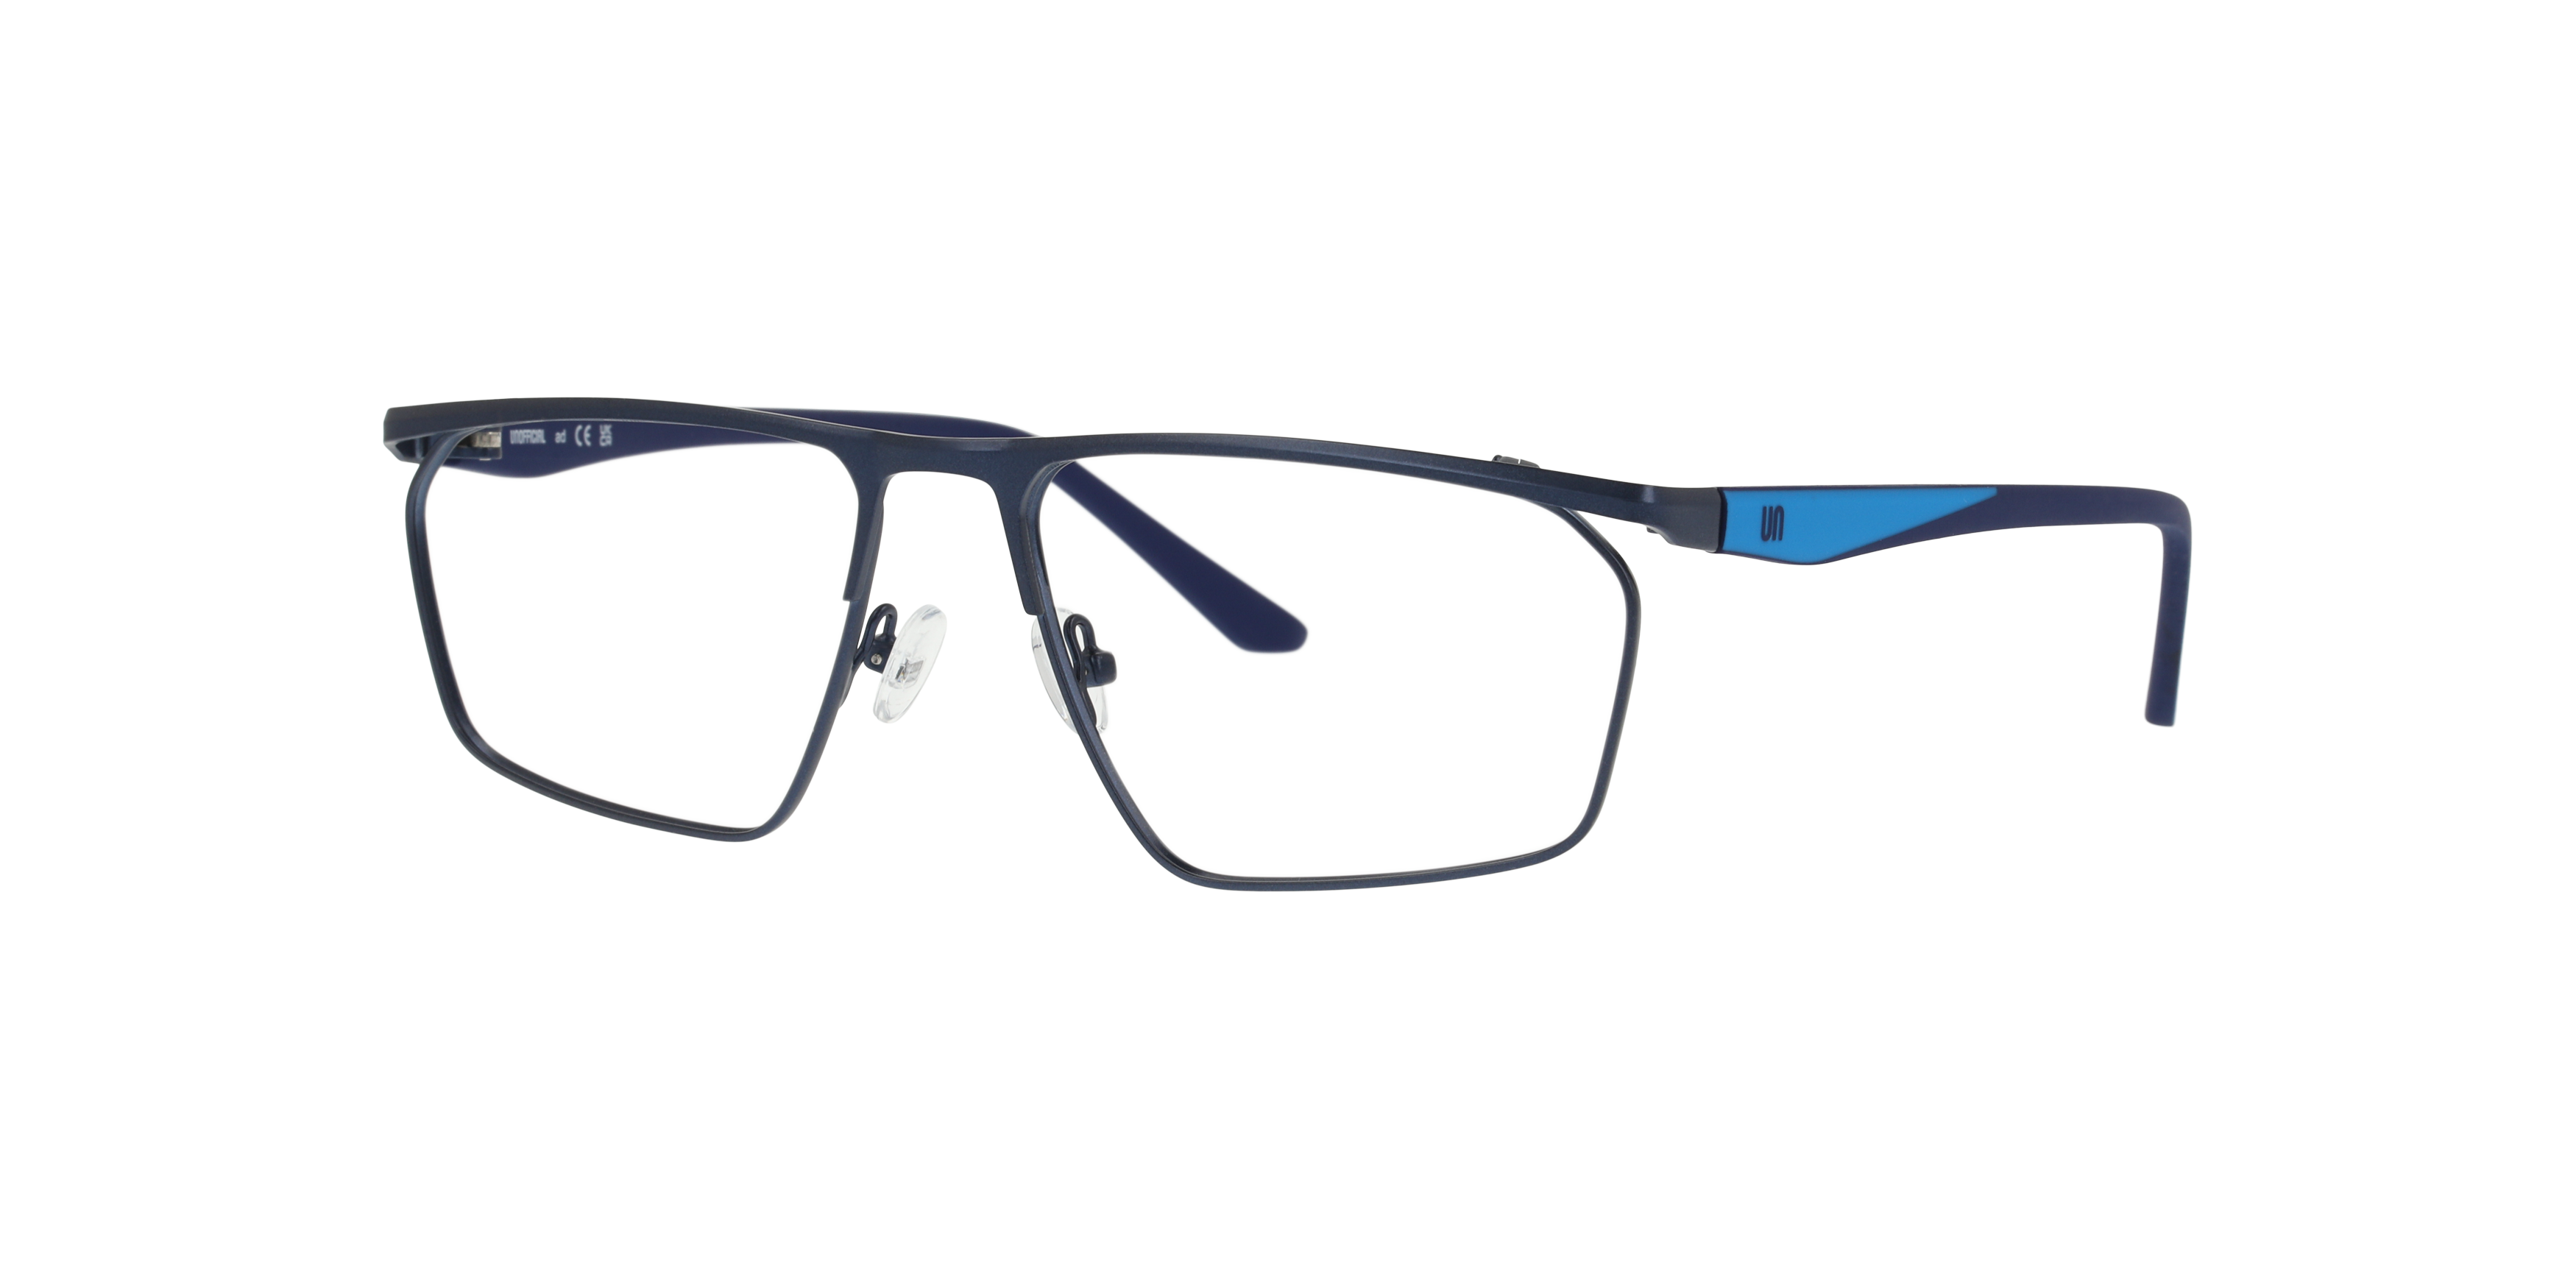 Angle_Left01 Unofficial UO1170 Glasses Transparent / Blue